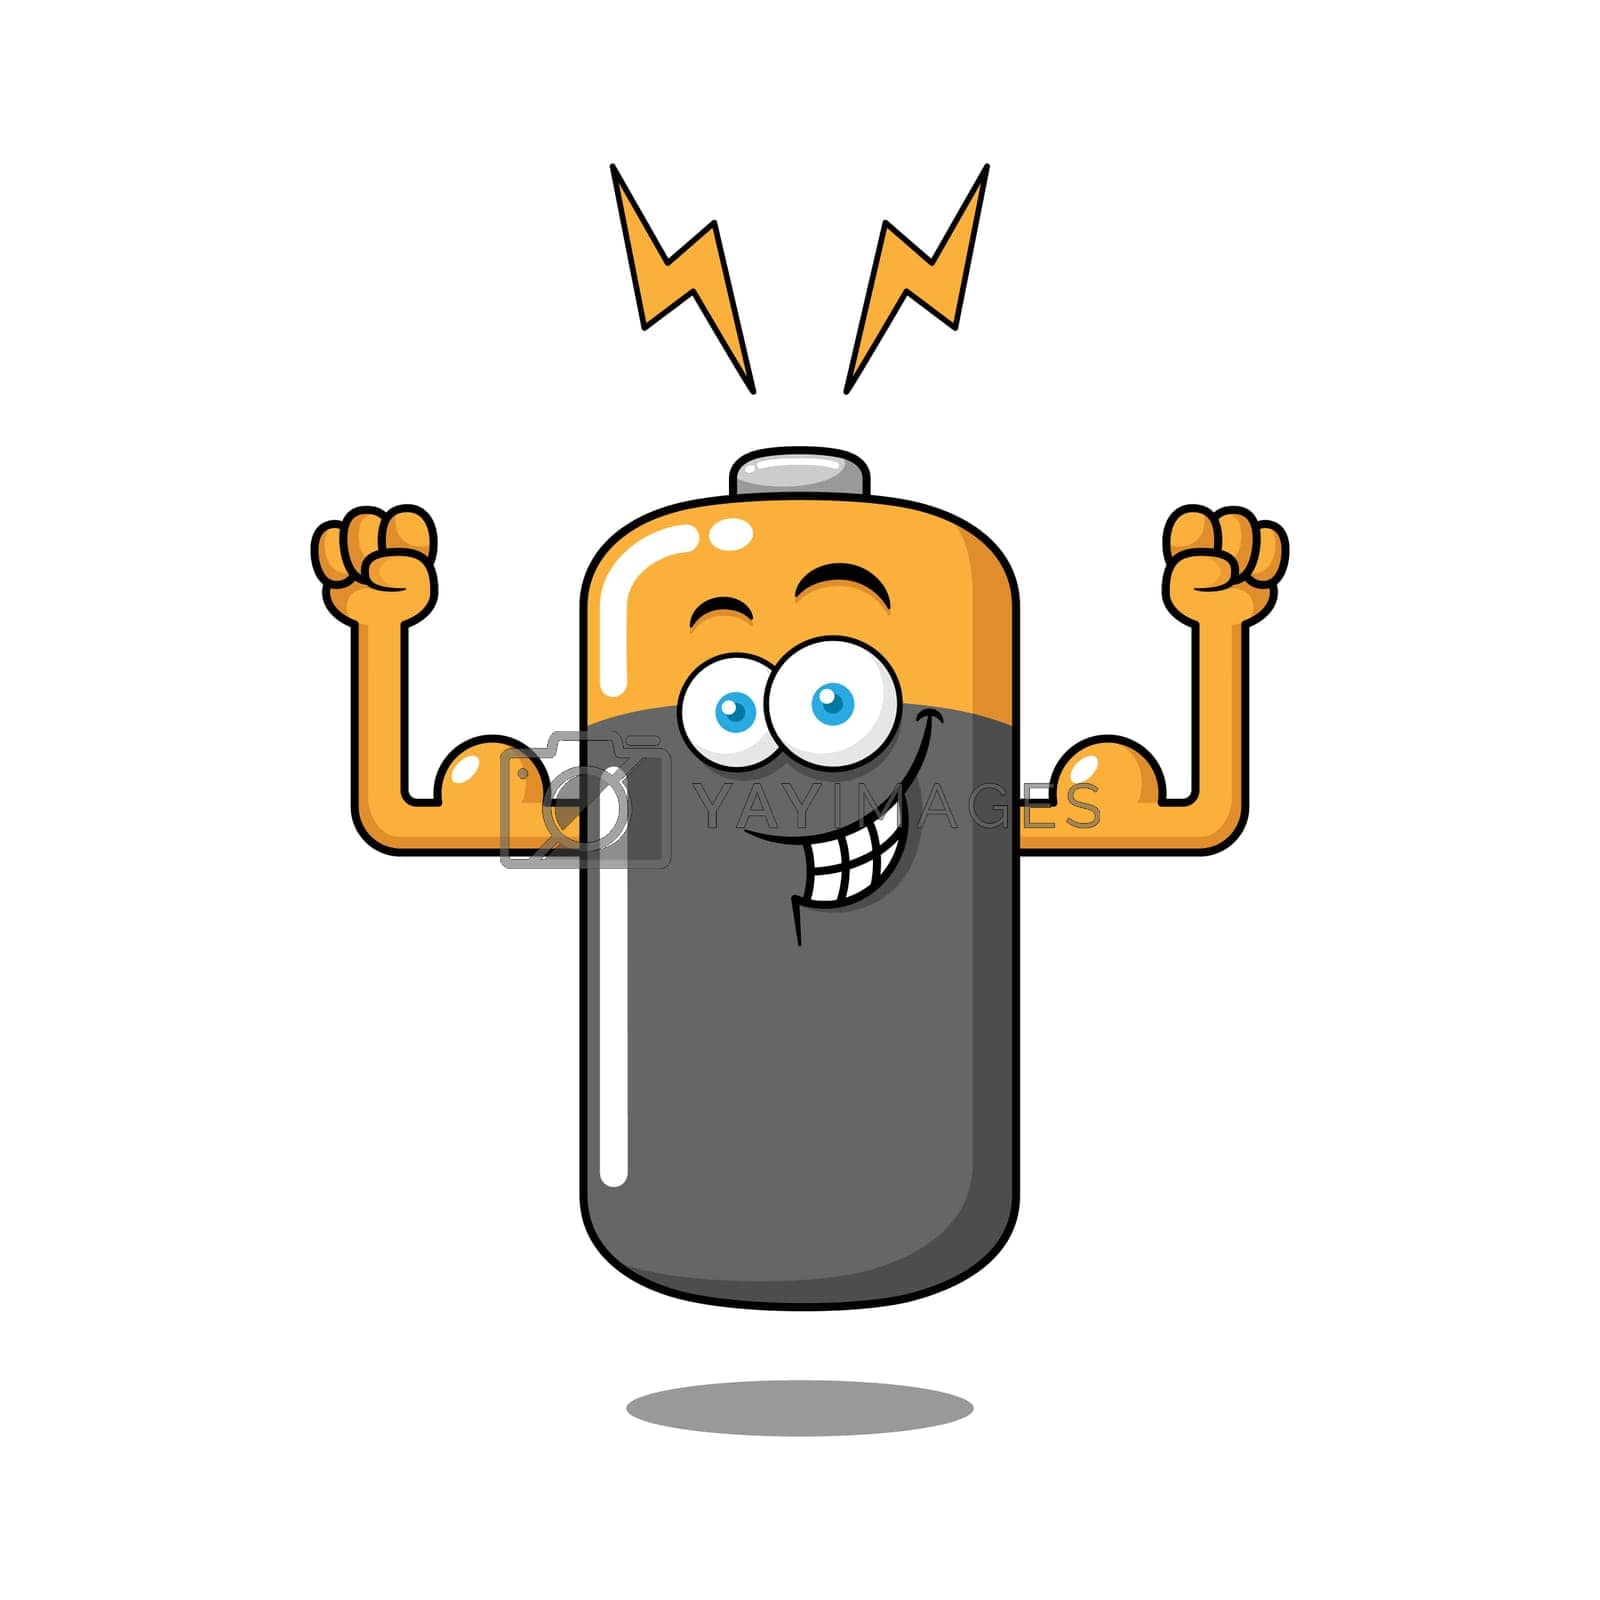 Royalty free image of Power Battery Cartoon Character by JuneYap